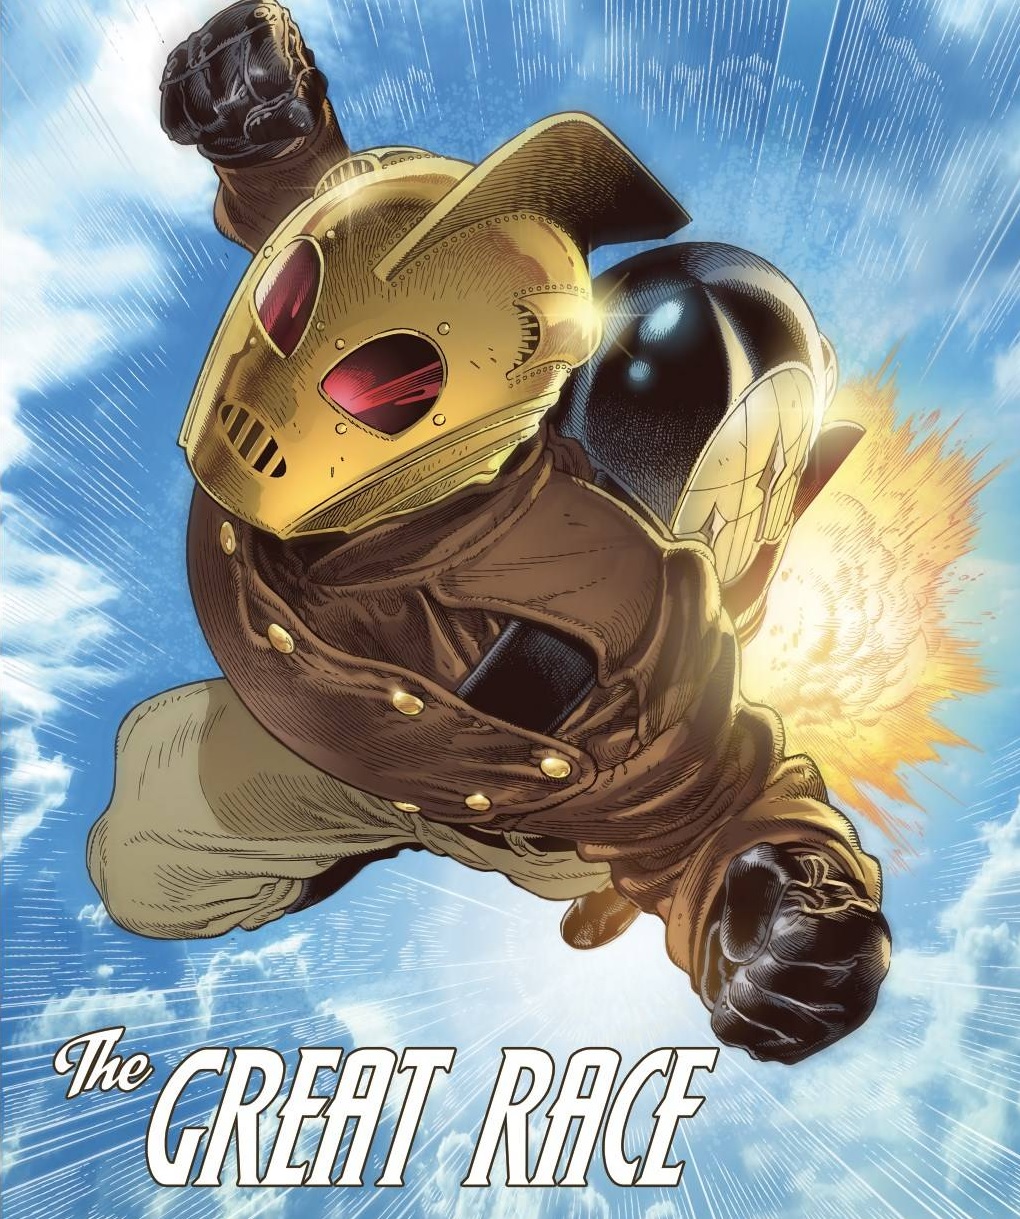 'The Rocketeer: The Great Race' #1 review: Blast off to adventure!